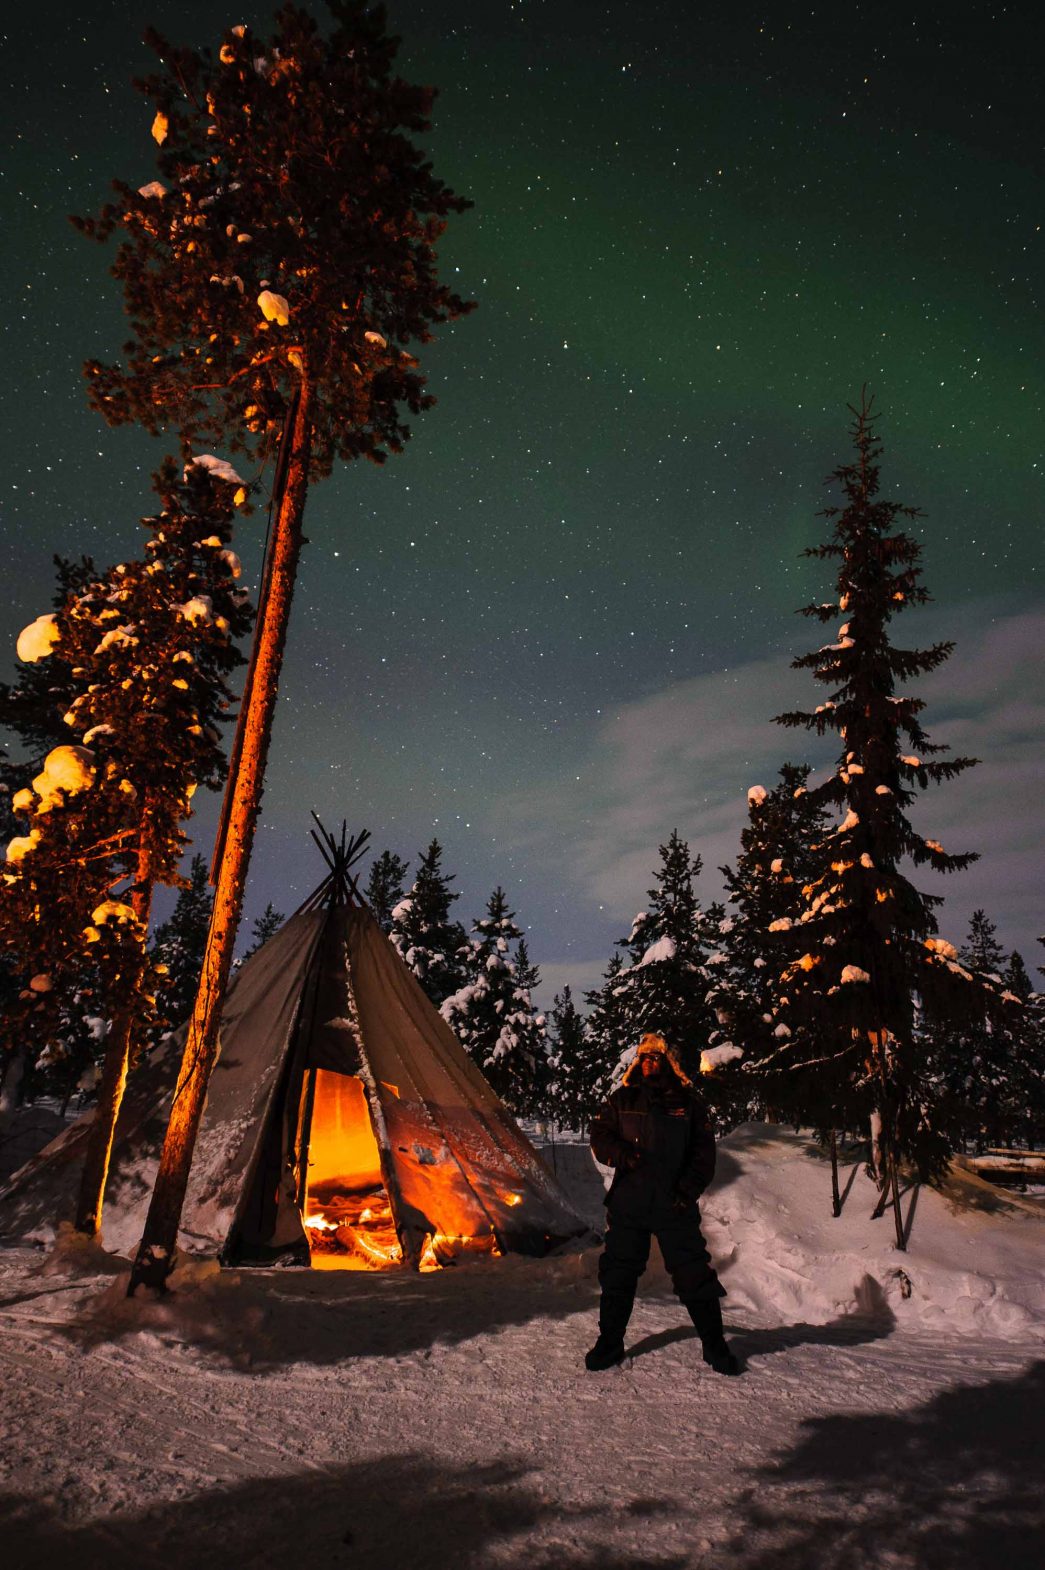 Lola looks up at the northern lights above tents at the reindeer lodge in Sweden.